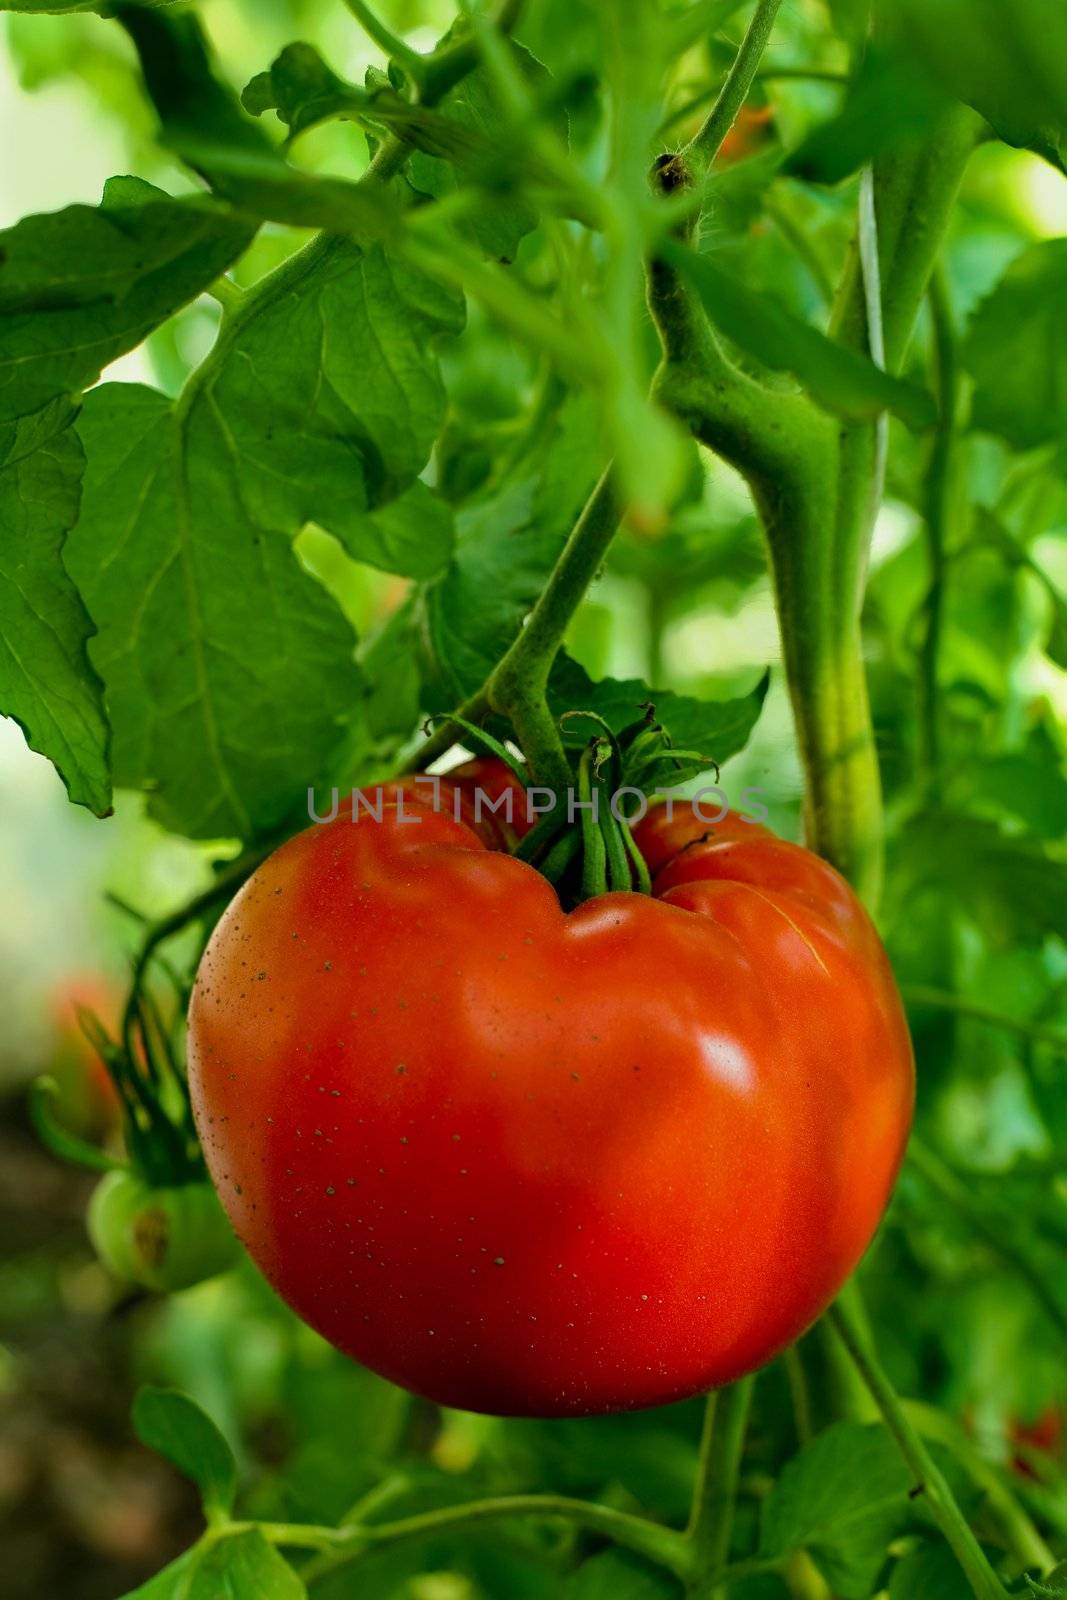 An image of ripe red tomatoes in greenhouses.